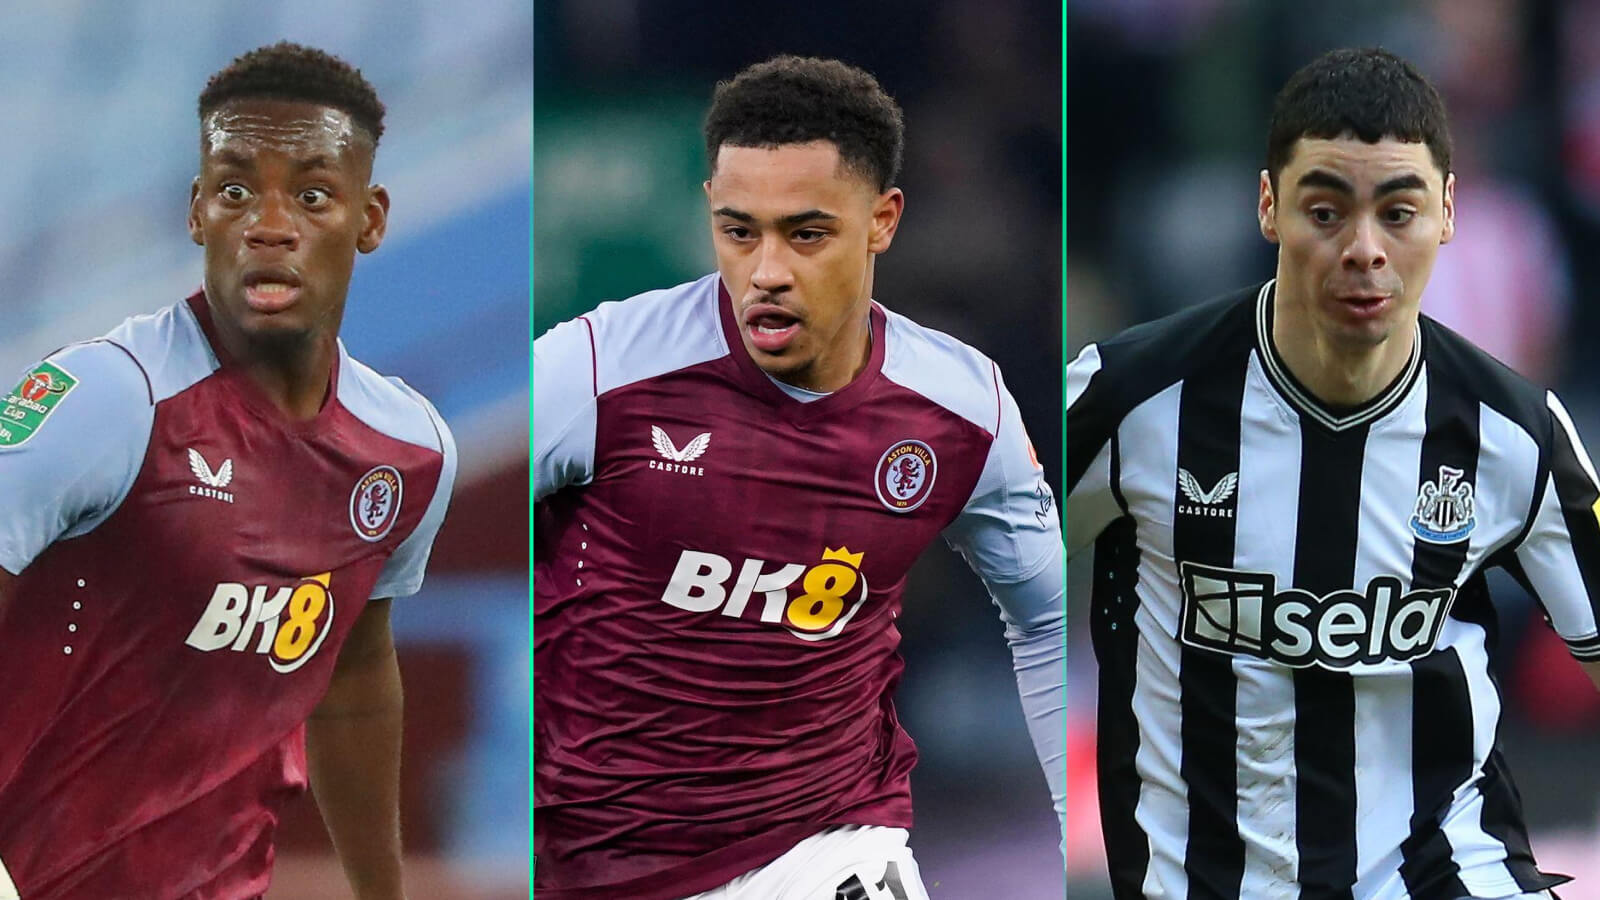 Ex-Newcastle United and Aston Villa star lined-up for shock role following major Will Still update - How past career achievements align with the new position